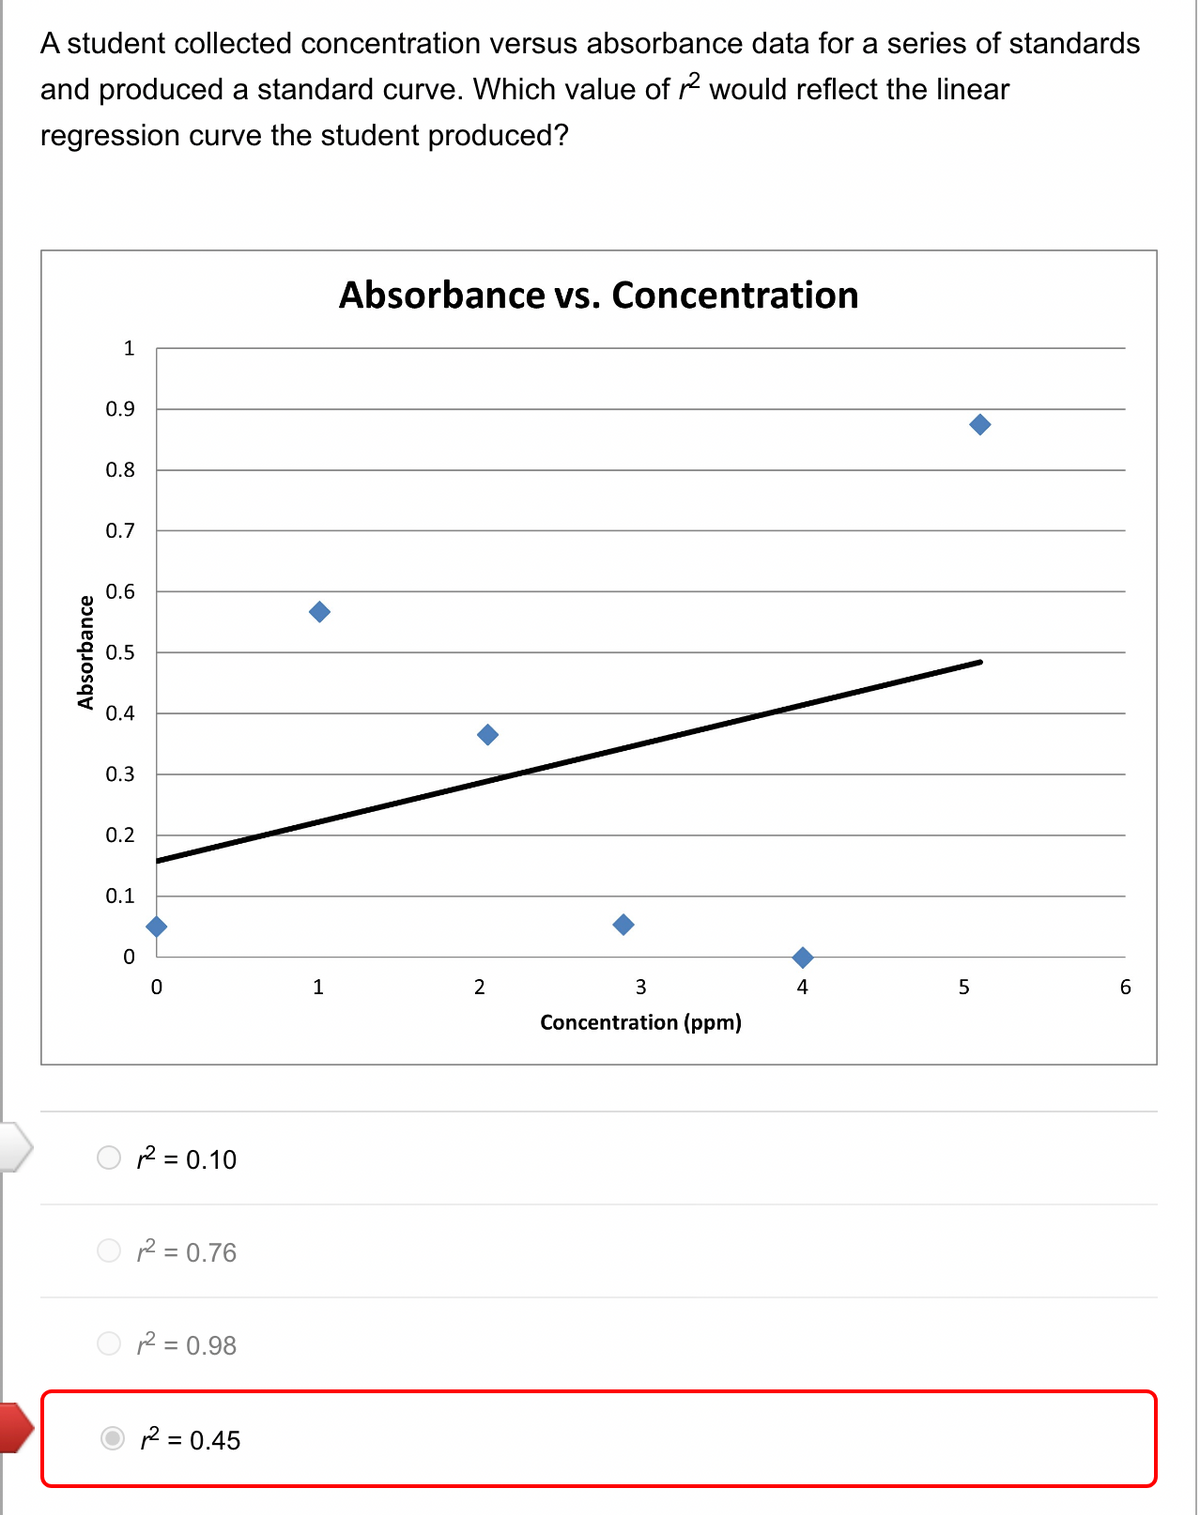 A student collected concentration versus absorbance data for a series of standards
and produced a standard curve. Which value of 2 would reflect the linear
regression curve the student produced?
Absorbance
1
0.9
0.8
0.7
0.6
0.5
0.4
0.3
0.2
0.1
0
0
² = 0.10
² = 0.76
² = 0.98
2 = 0.45
1
Absorbance vs. Concentration
2
3
Concentration (ppm)
4
5
6